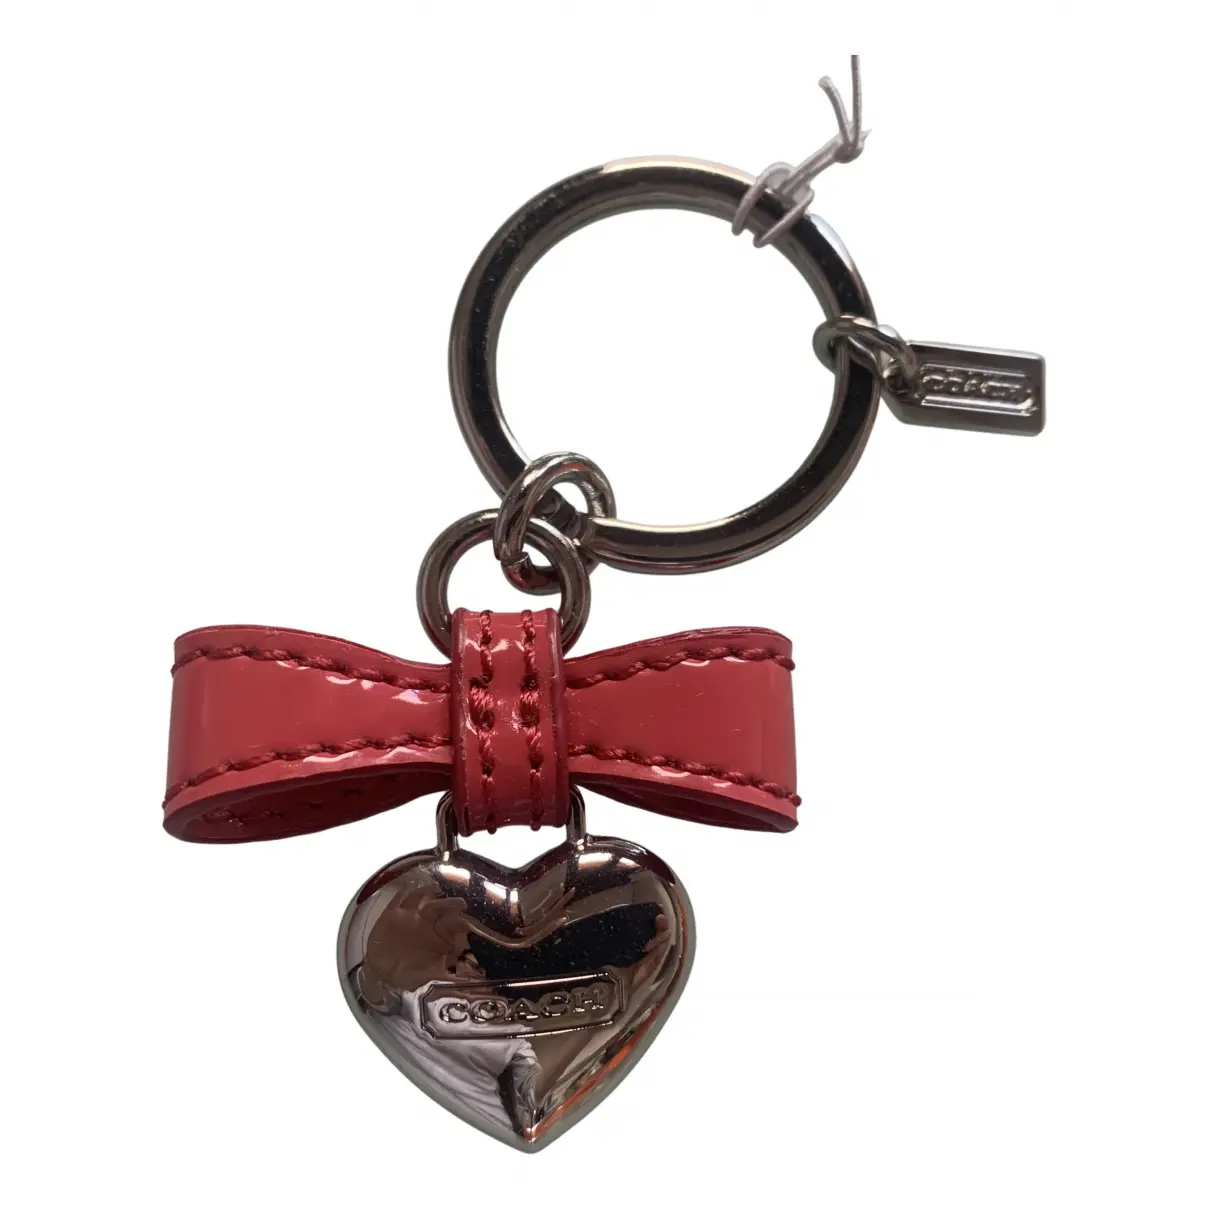 Patent leather key ring Coach